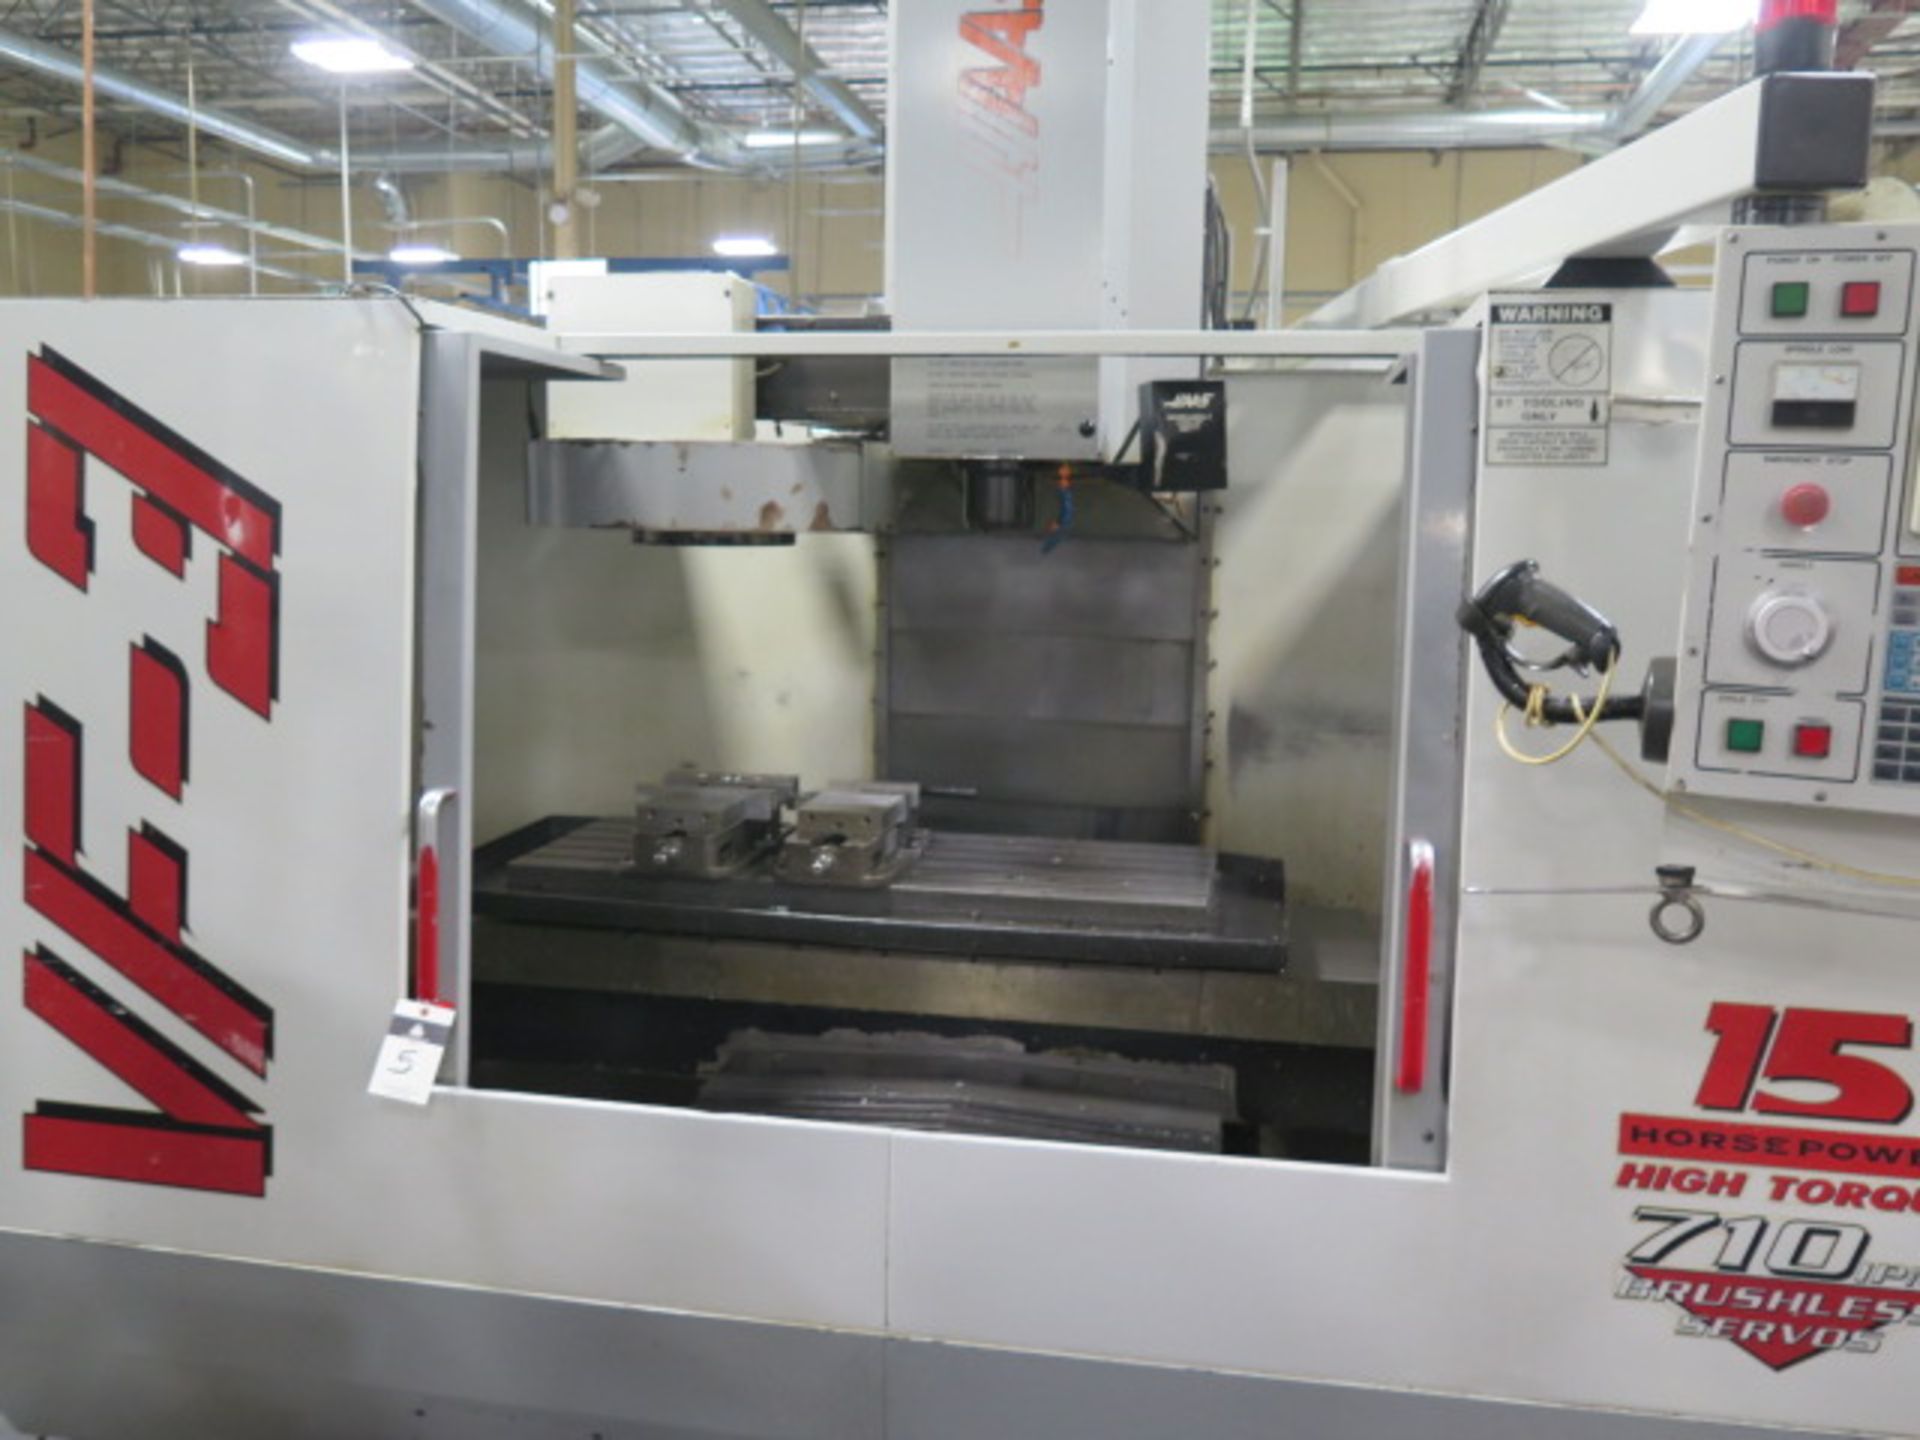 1997 Haas VF-3 4-Axis CNC Vertical Machining Center s/n 10188 w/ Haas Controls, 20-Station ATC, BT- - Image 4 of 18